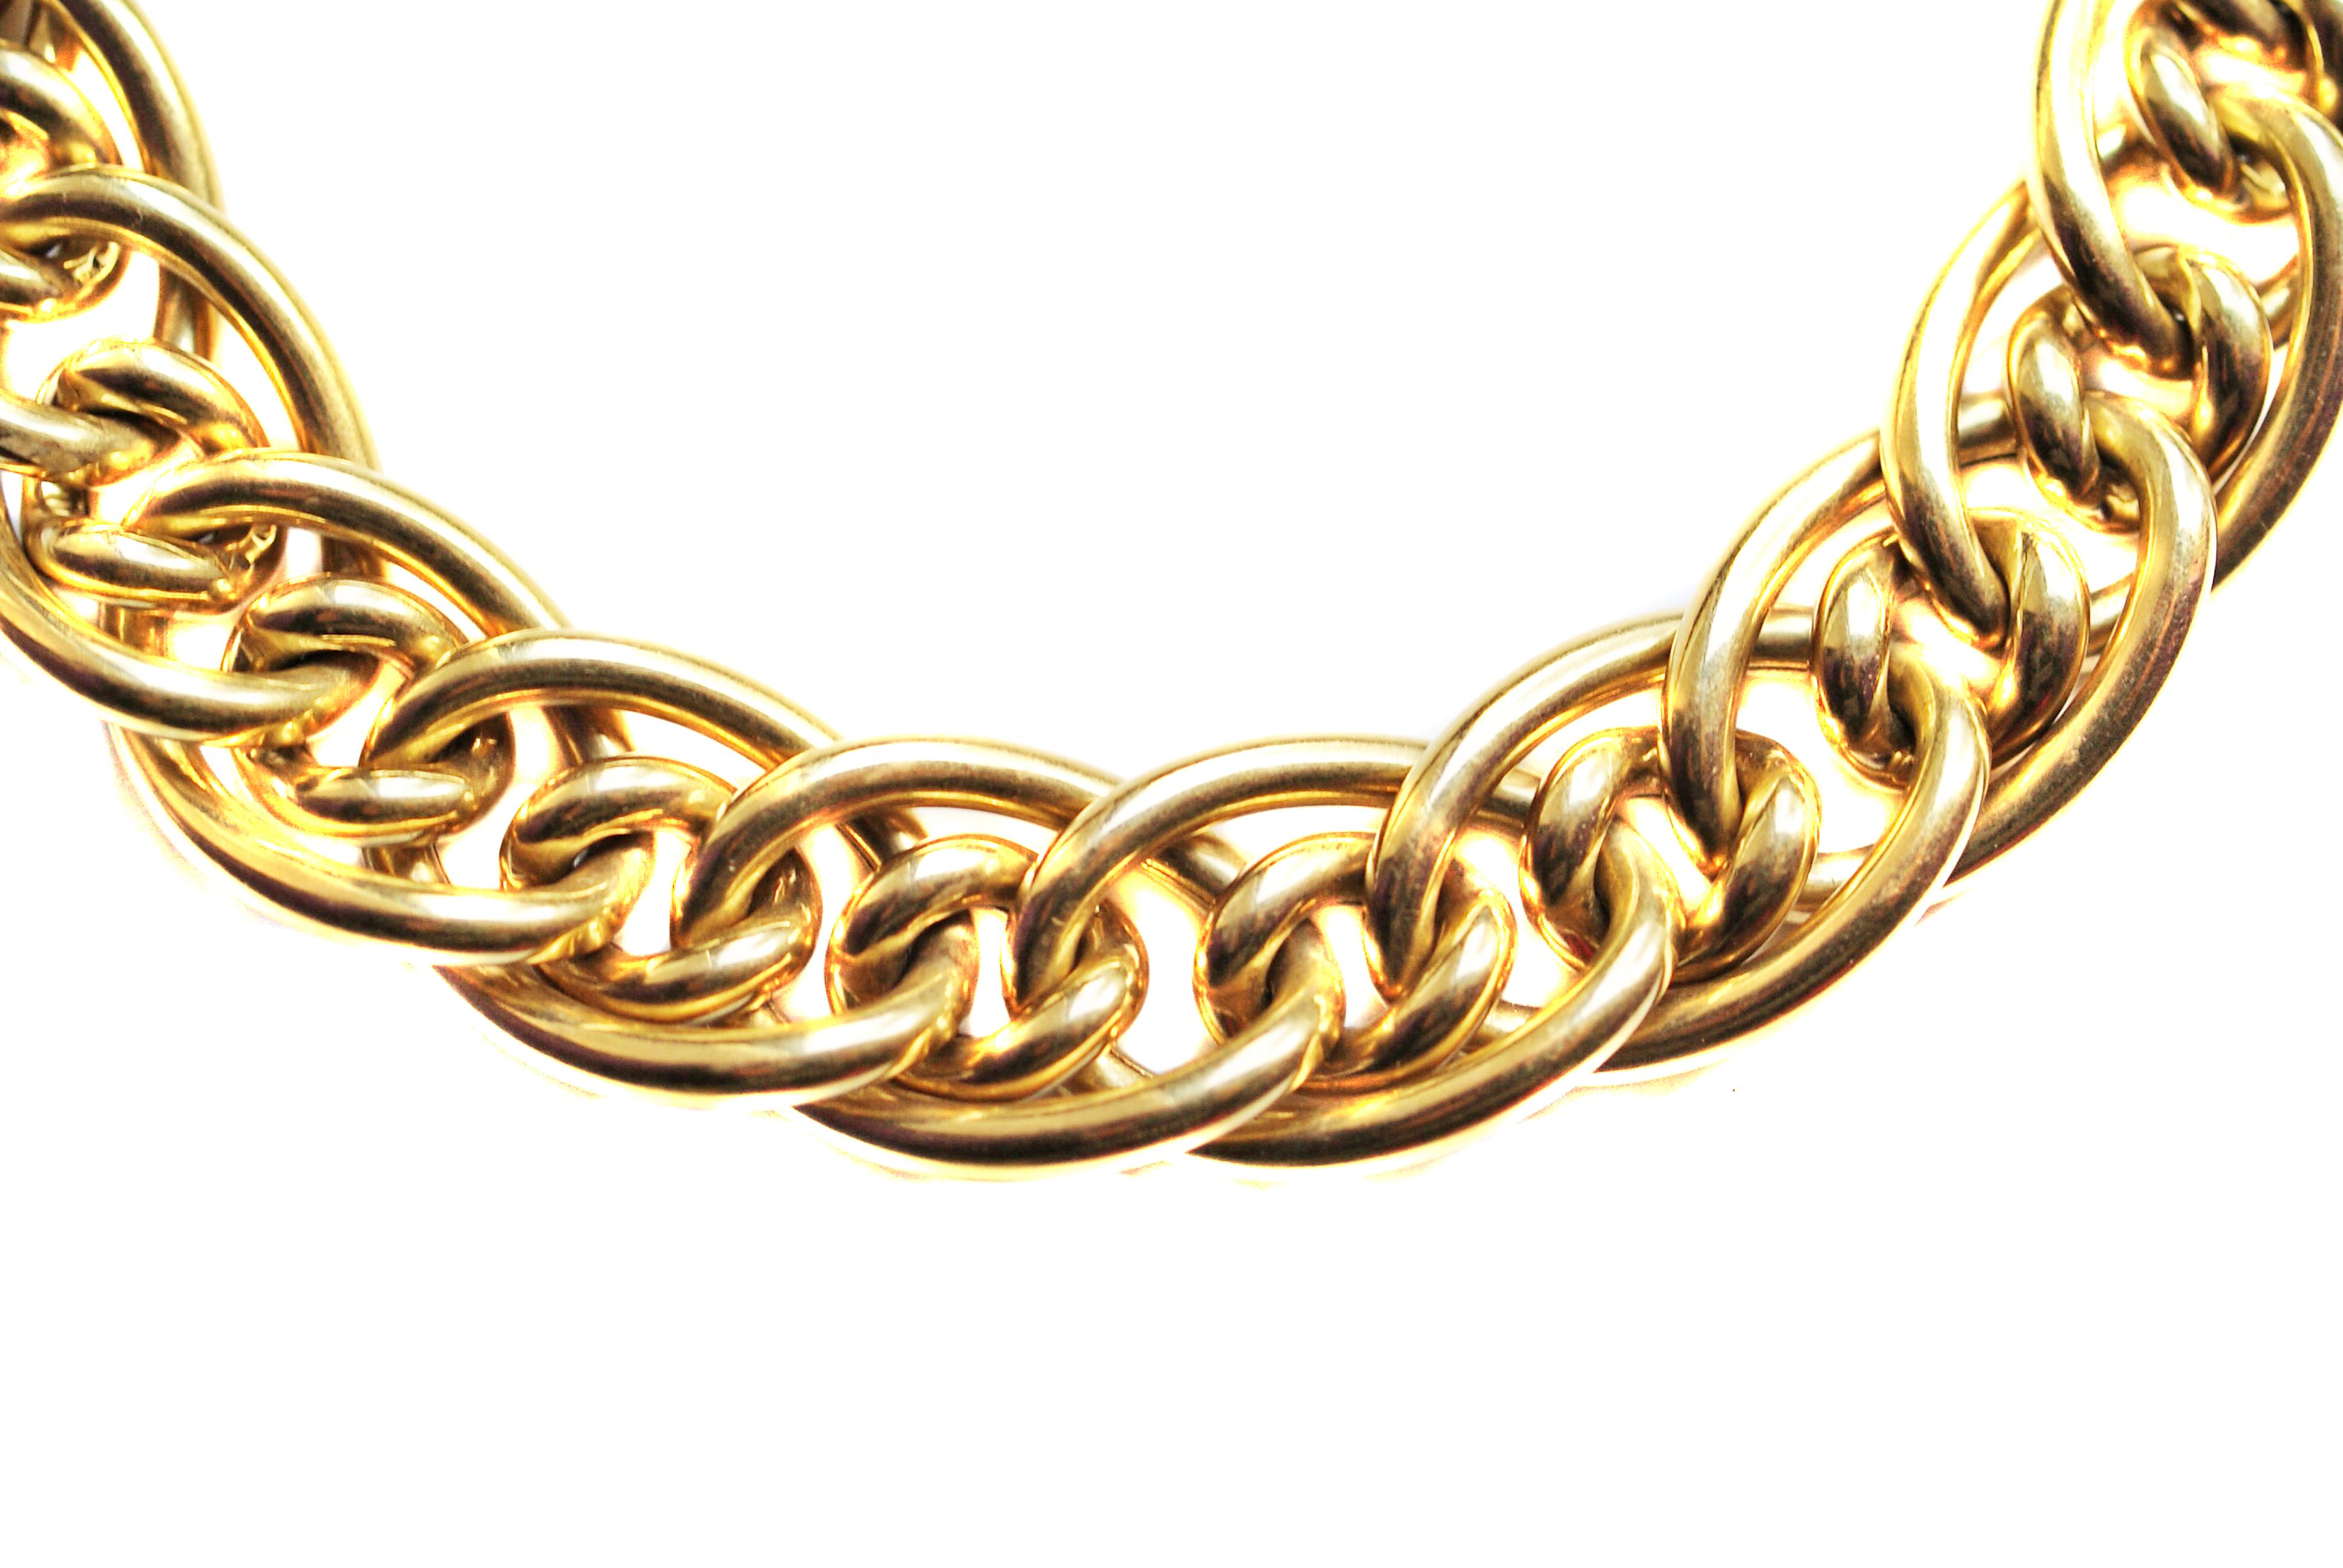 Chic and most wearable 18 karat yellow gold flexible link choker necklace by Tiffany & Co. Beautifully hand-crafted a row of flexibly connected curb links are embedded into larger oval curb links, giving this necklace its distinct and bold look. The